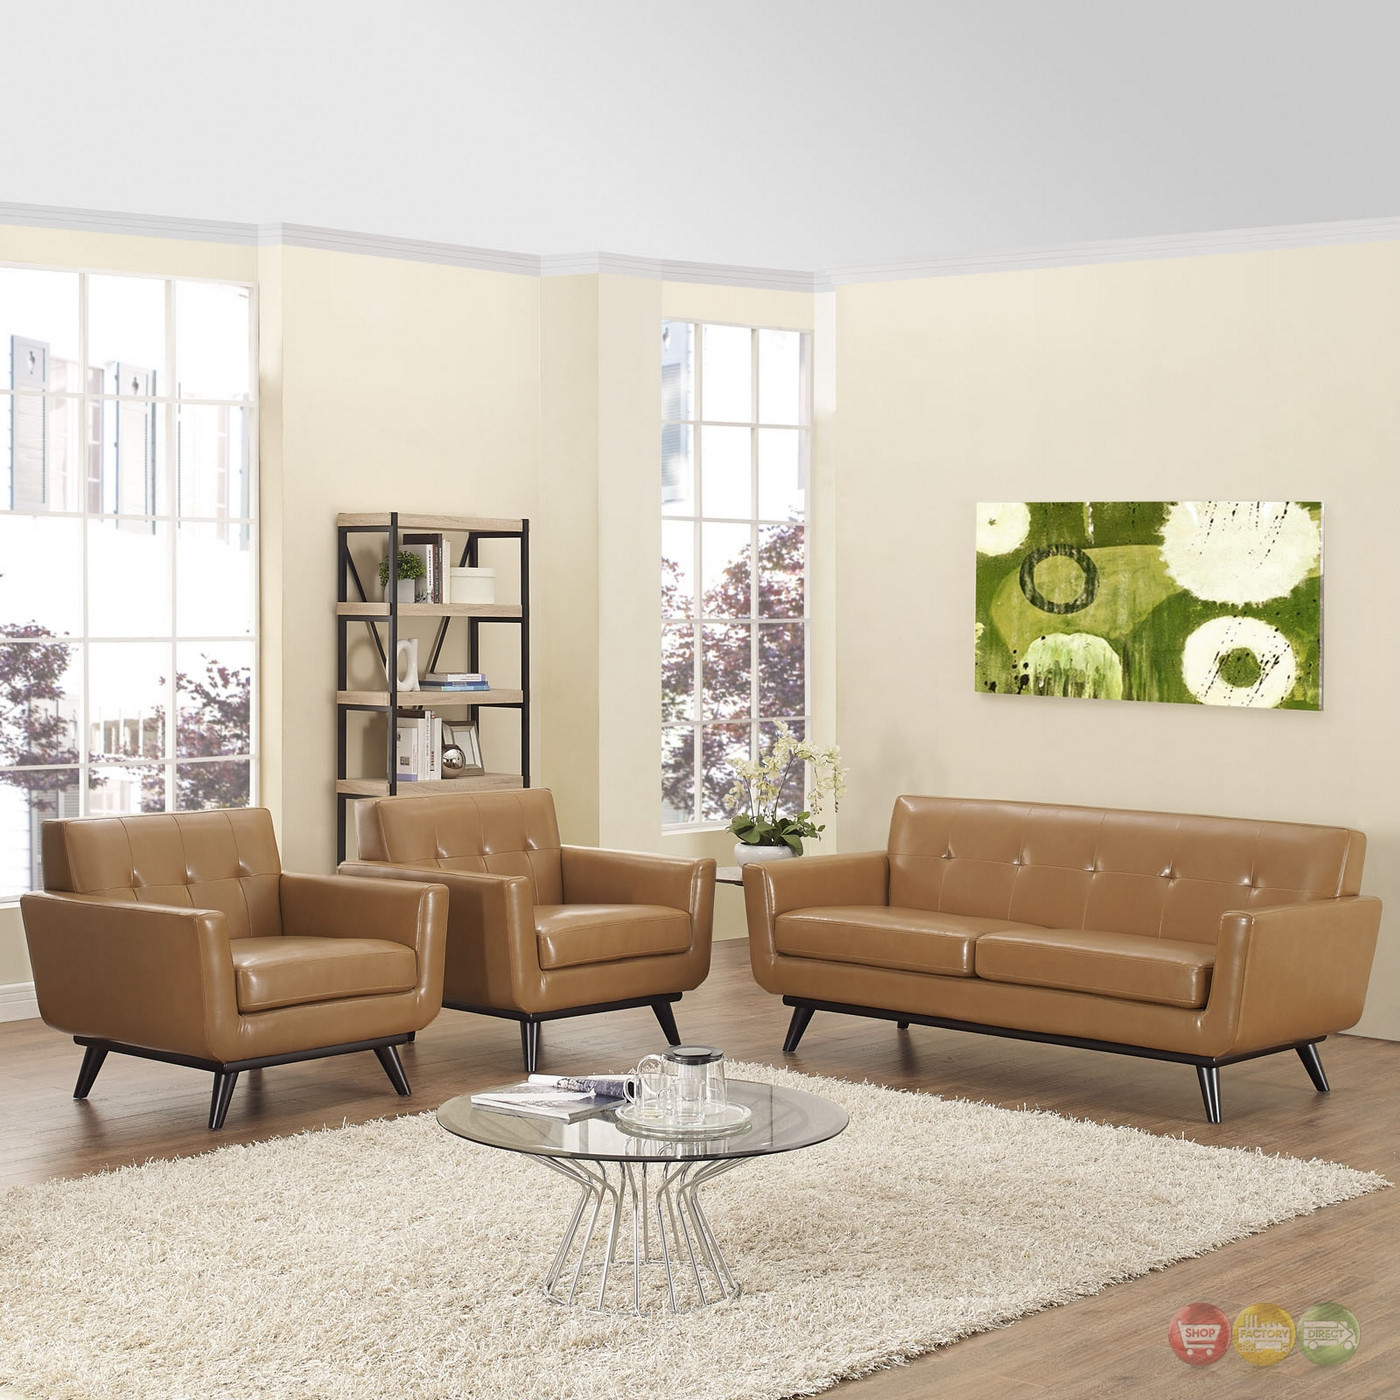 Modern Leather Living Room Set
 Engage Contemporary 3pc Button tufted Leather Living Room